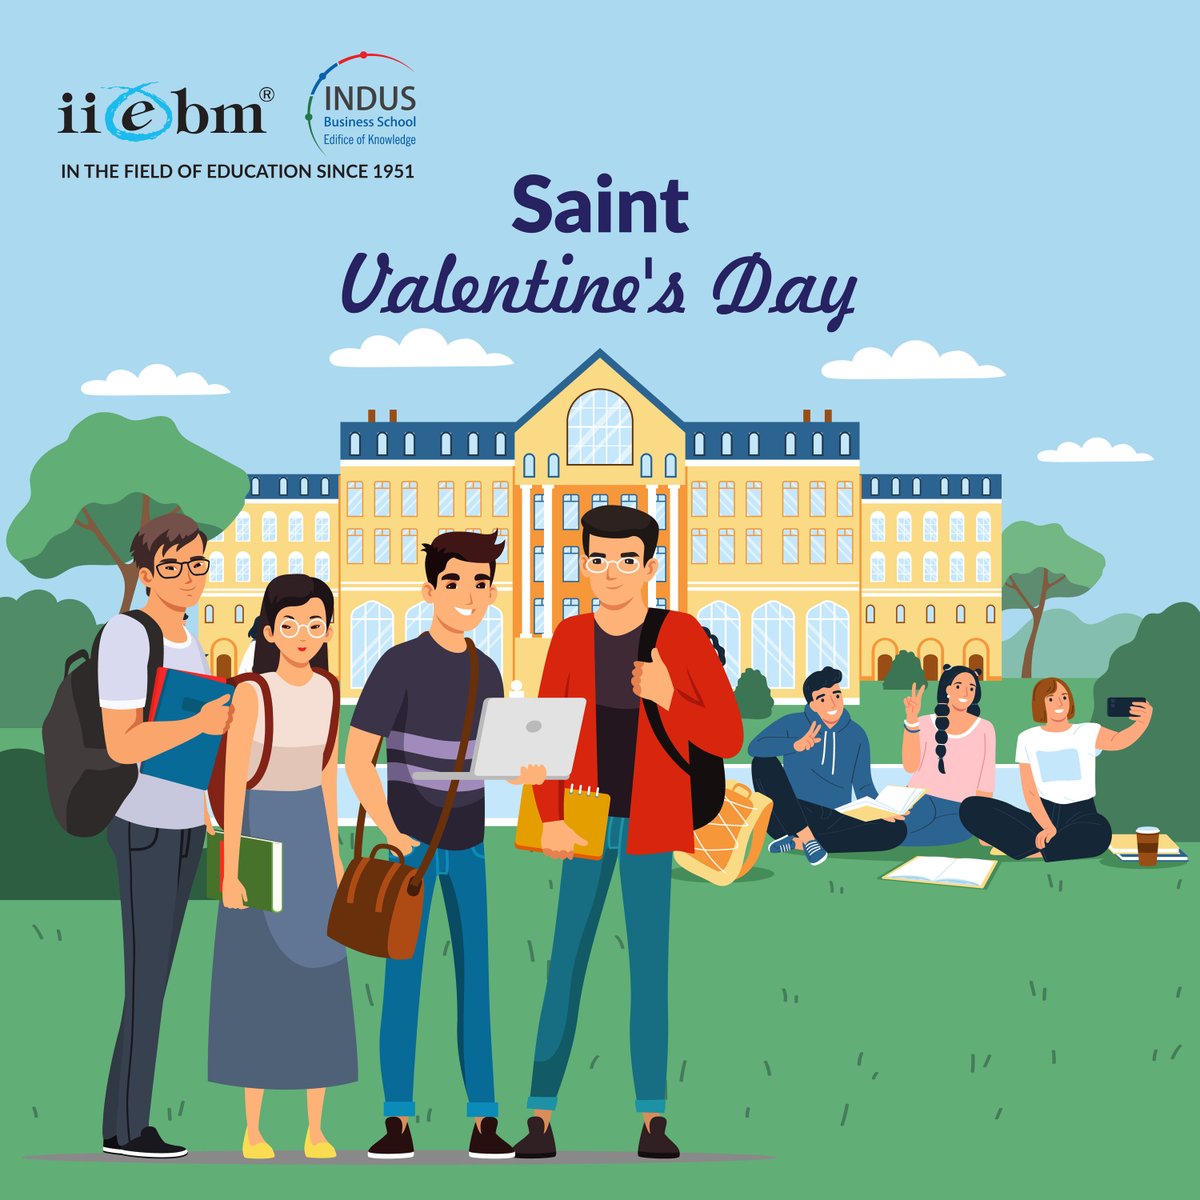 Celebrate the power of connections and friendships on this special day. Spread love and kindness in the management world!
#ManagementMatters #ValentinesDay #LoveAndLeadership #EducationInspiration #IIEBMPune #IIEBM